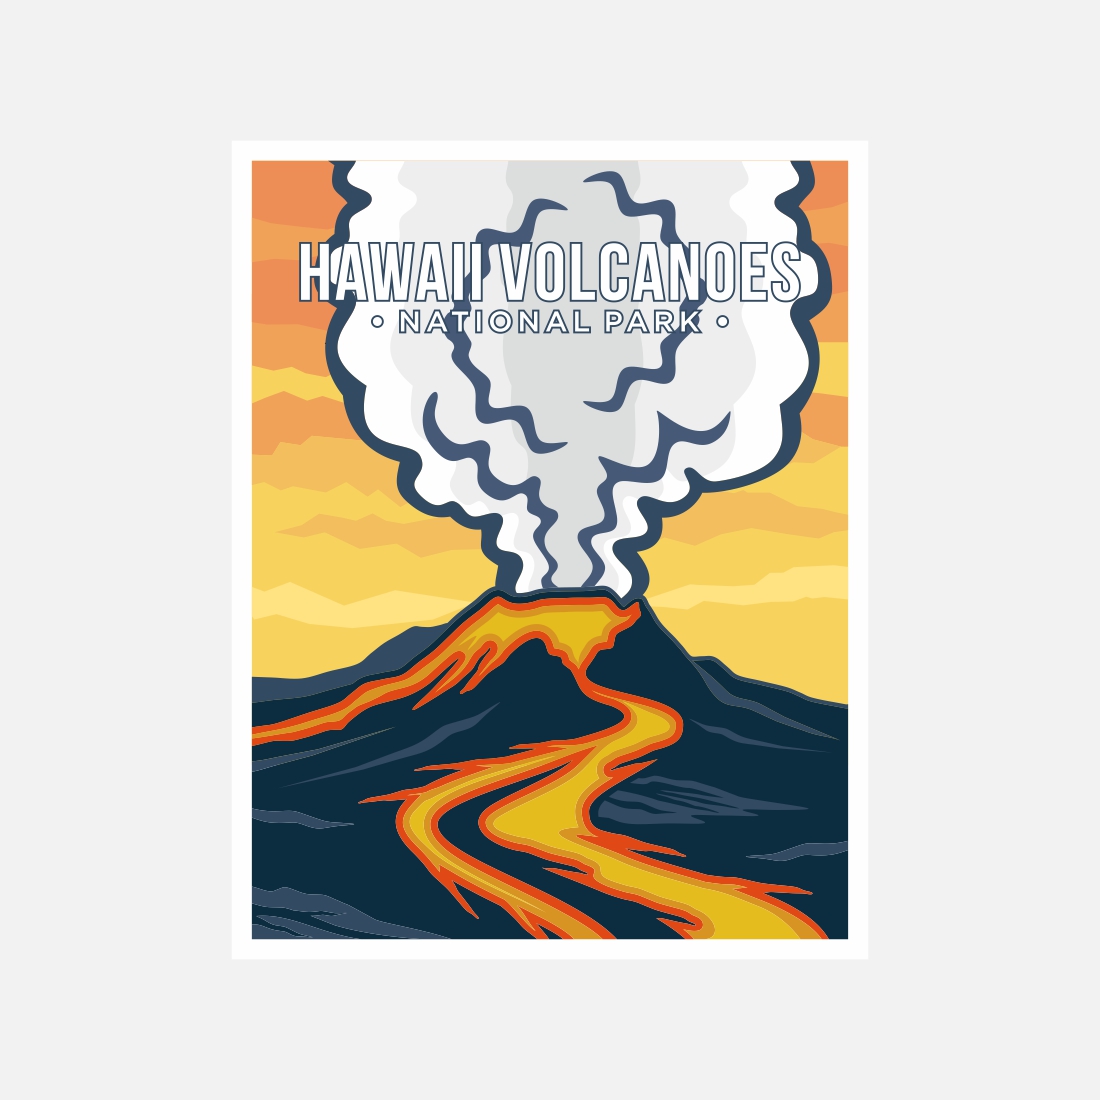 Hawaii Volcano National Park poster vector illustration design – Only $8 cover image.